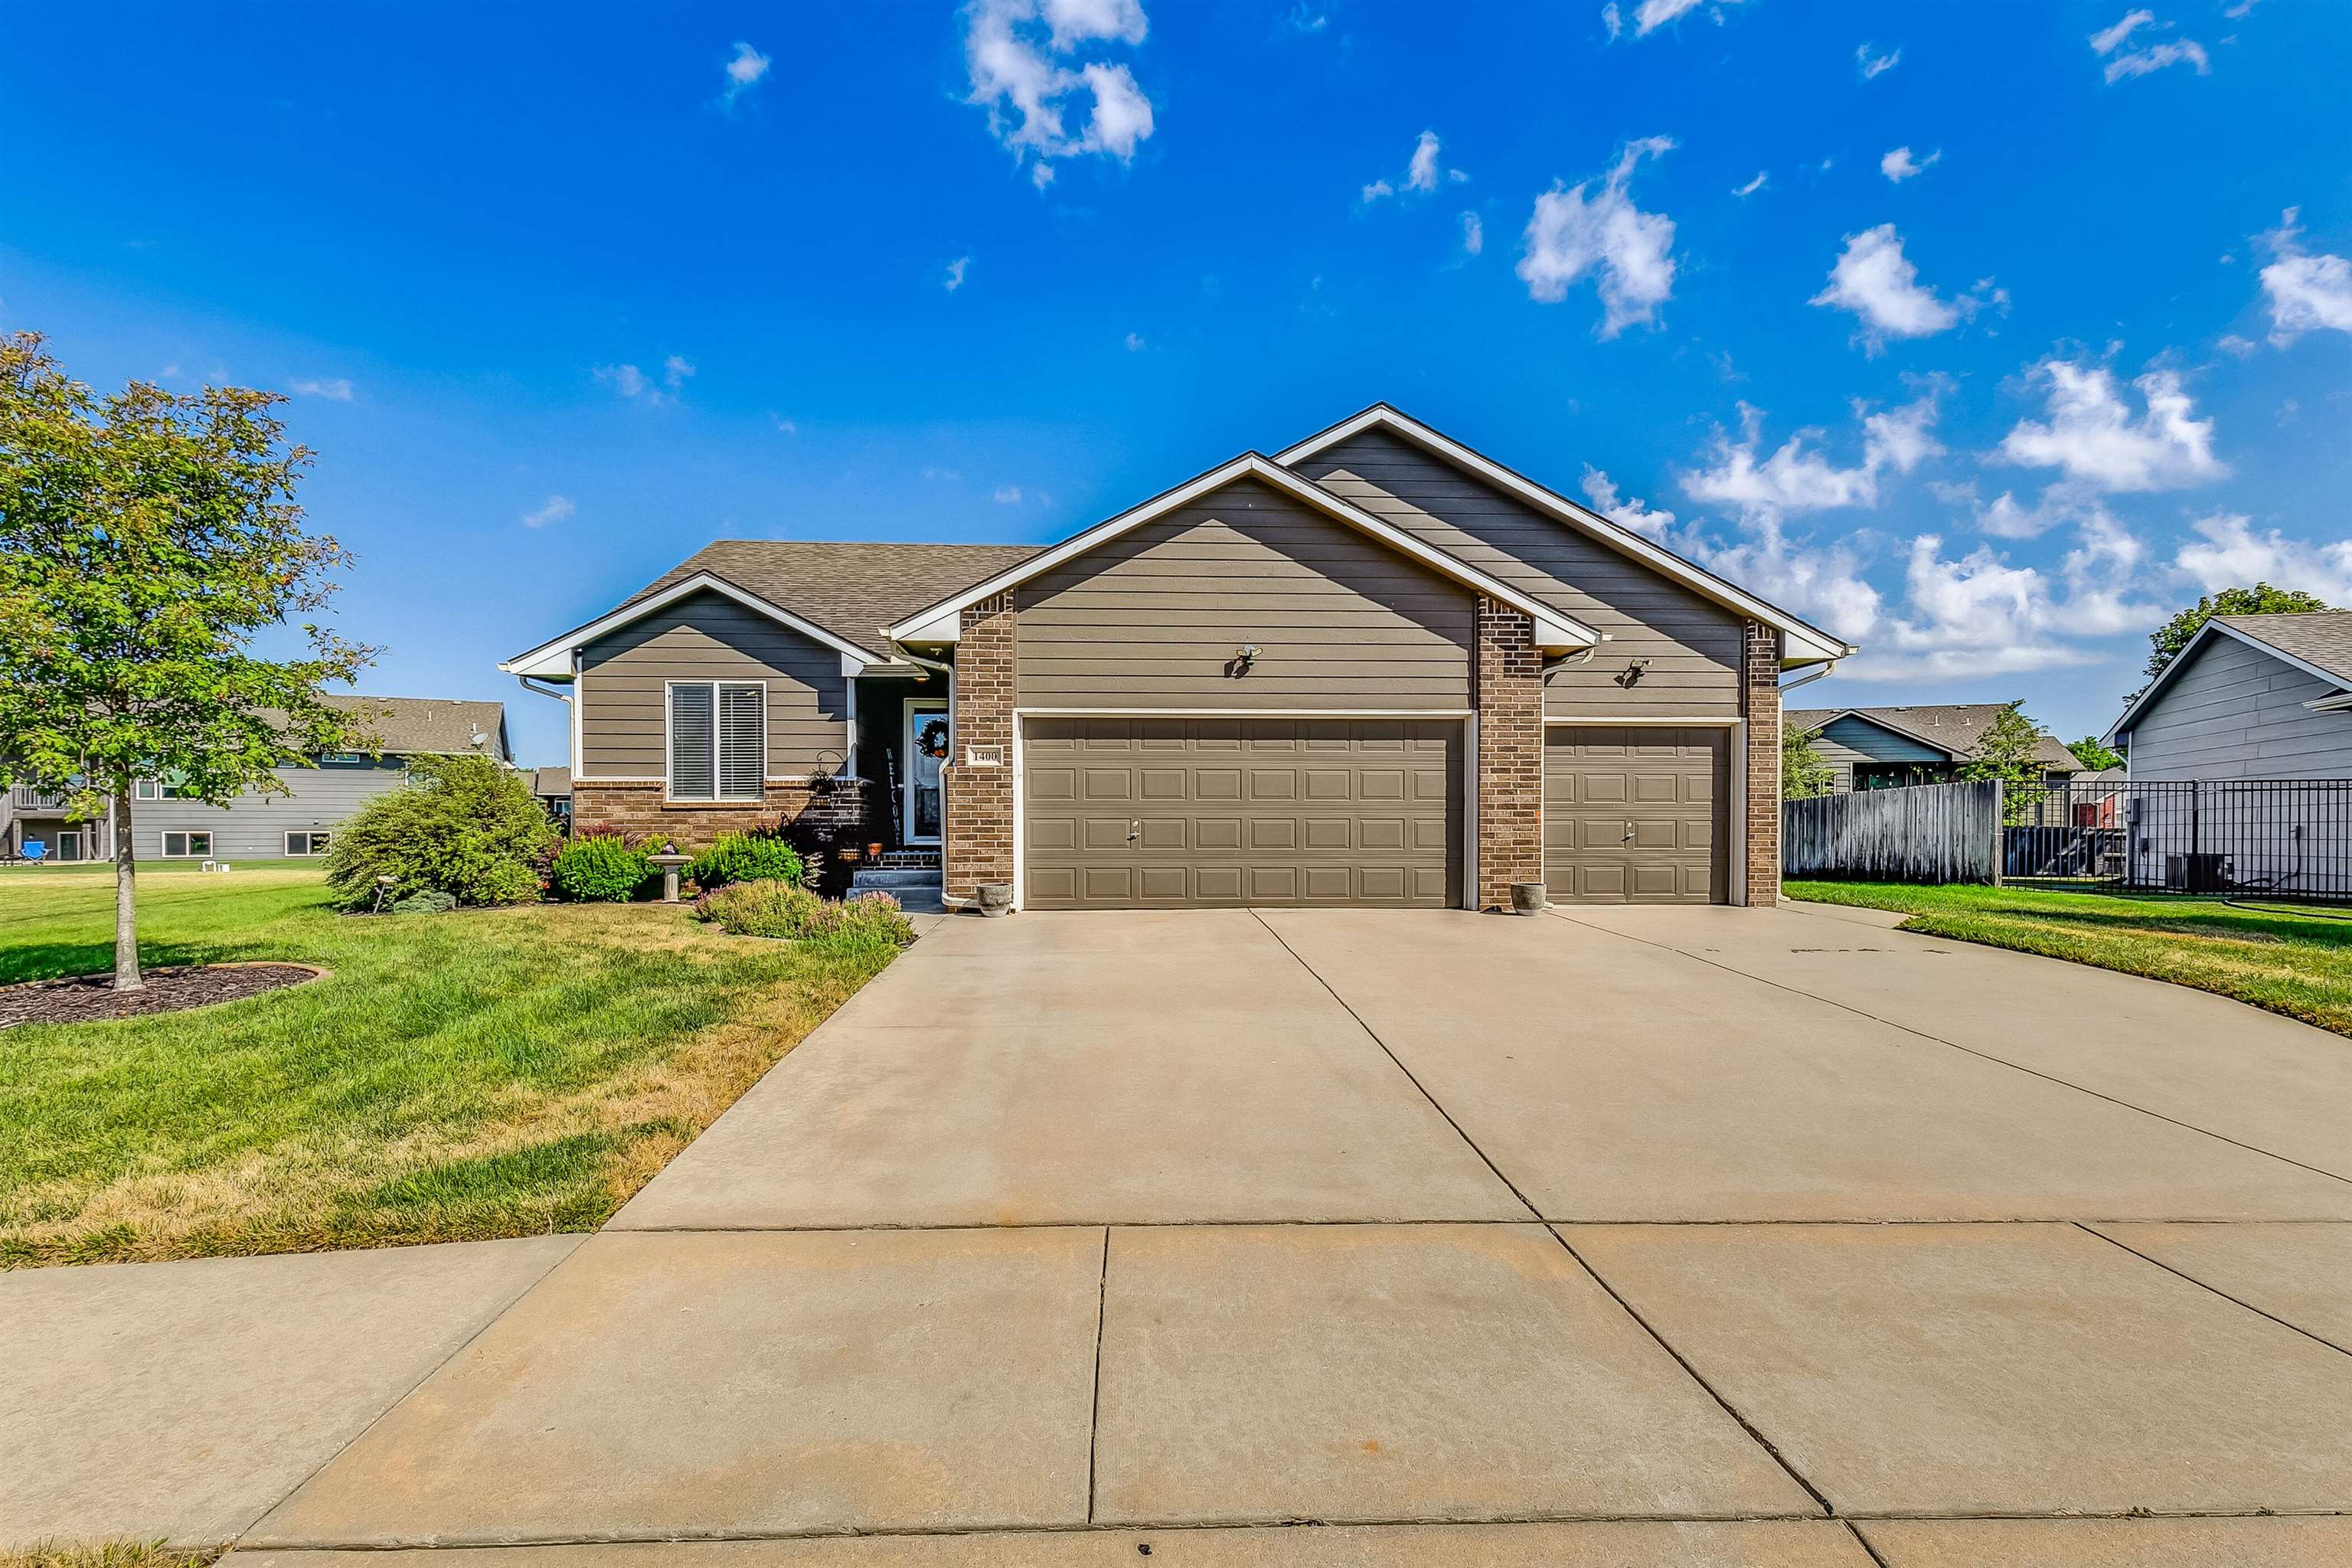 Welcome to this cute ranch style home. When you walk in, you are greeted with vaulted ceilings and a